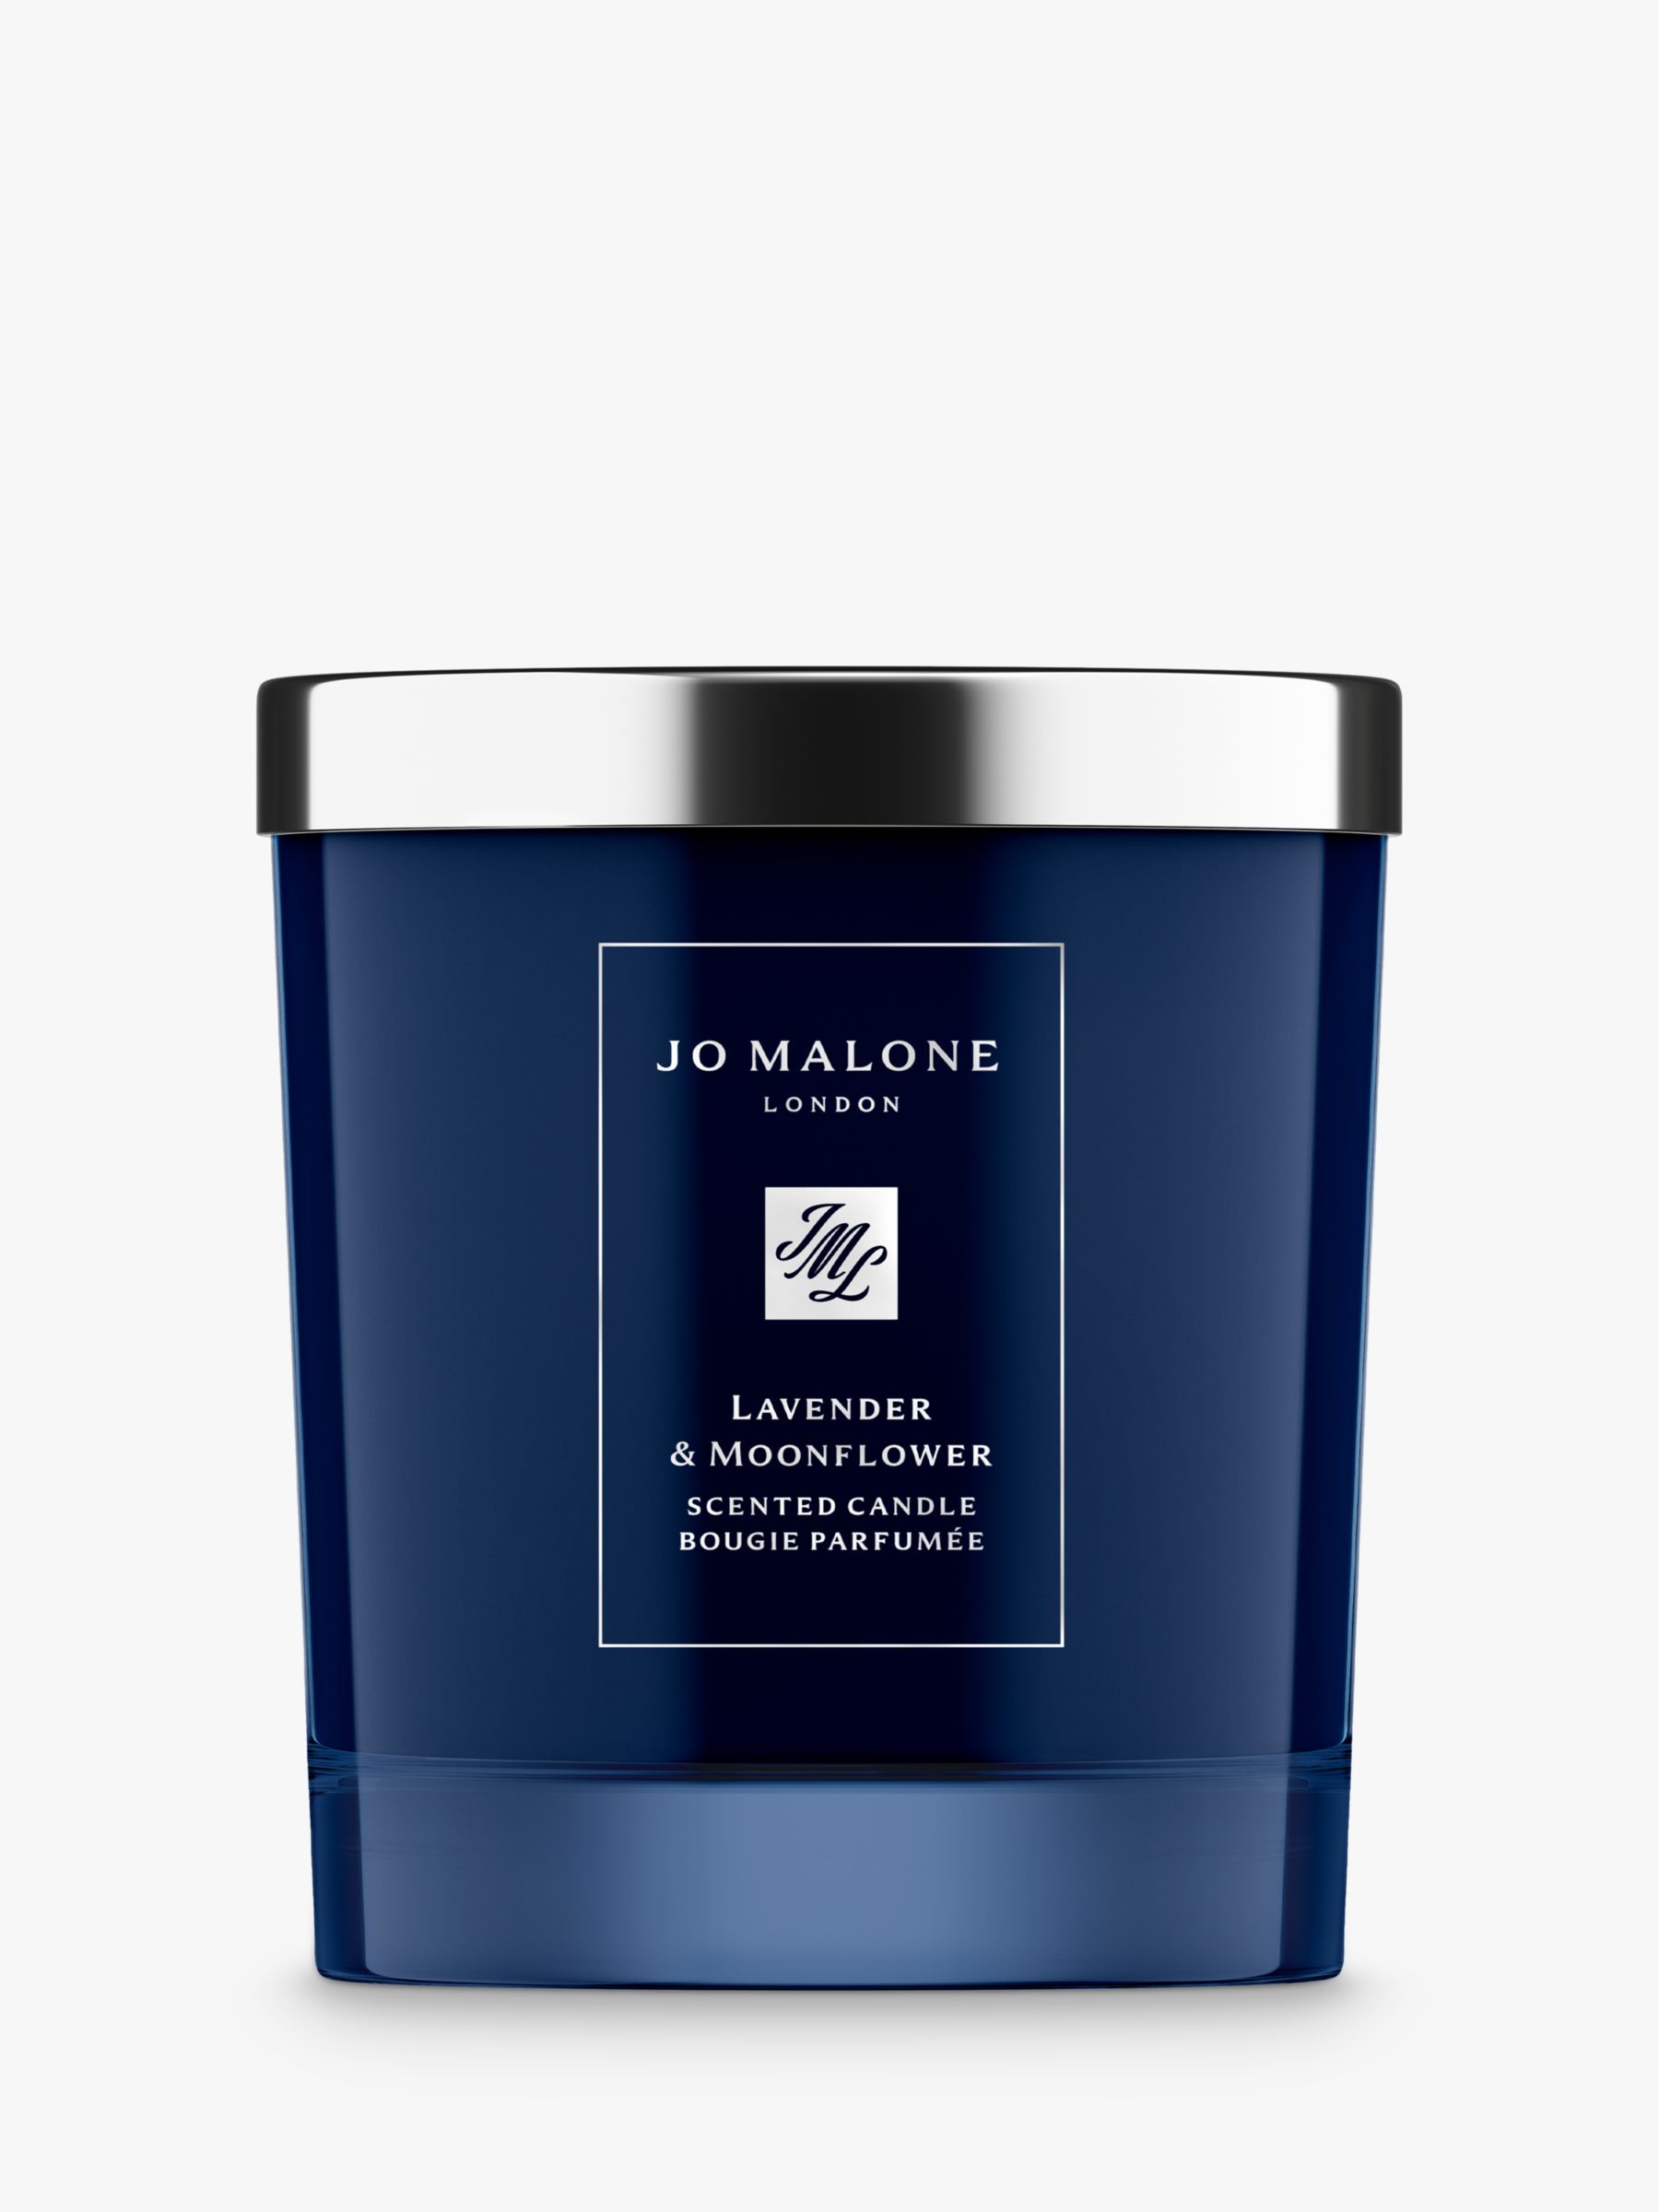 Jo Malone London Lavender & Moonflower Scented Home Candle, 200g